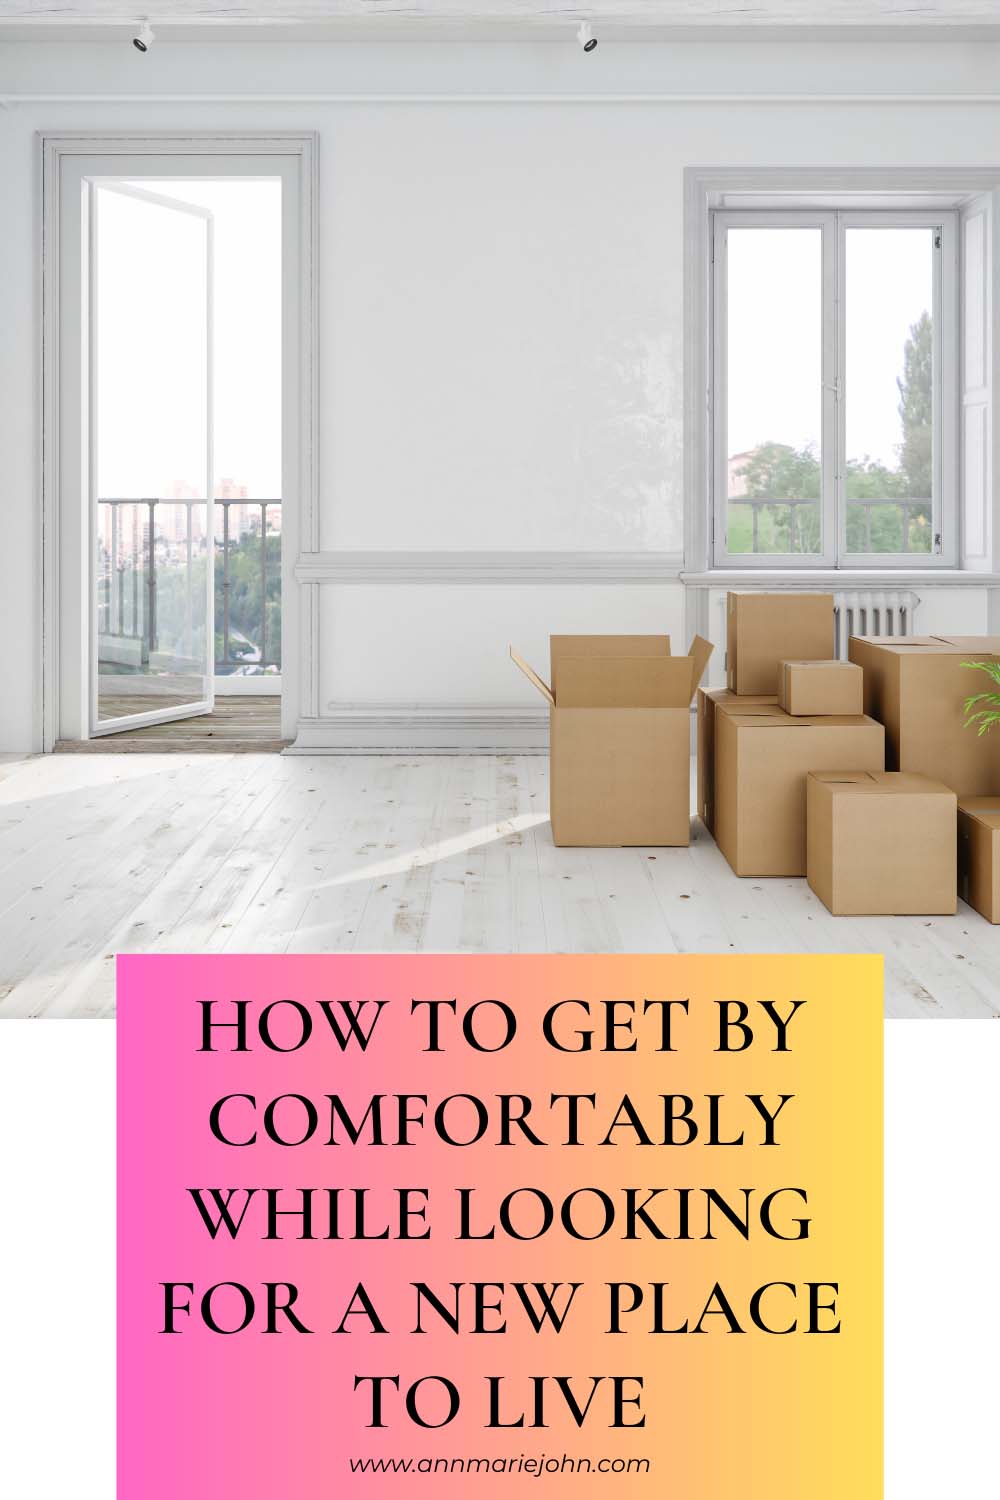 How To Get By Comfortably While Looking For A New Place To Live